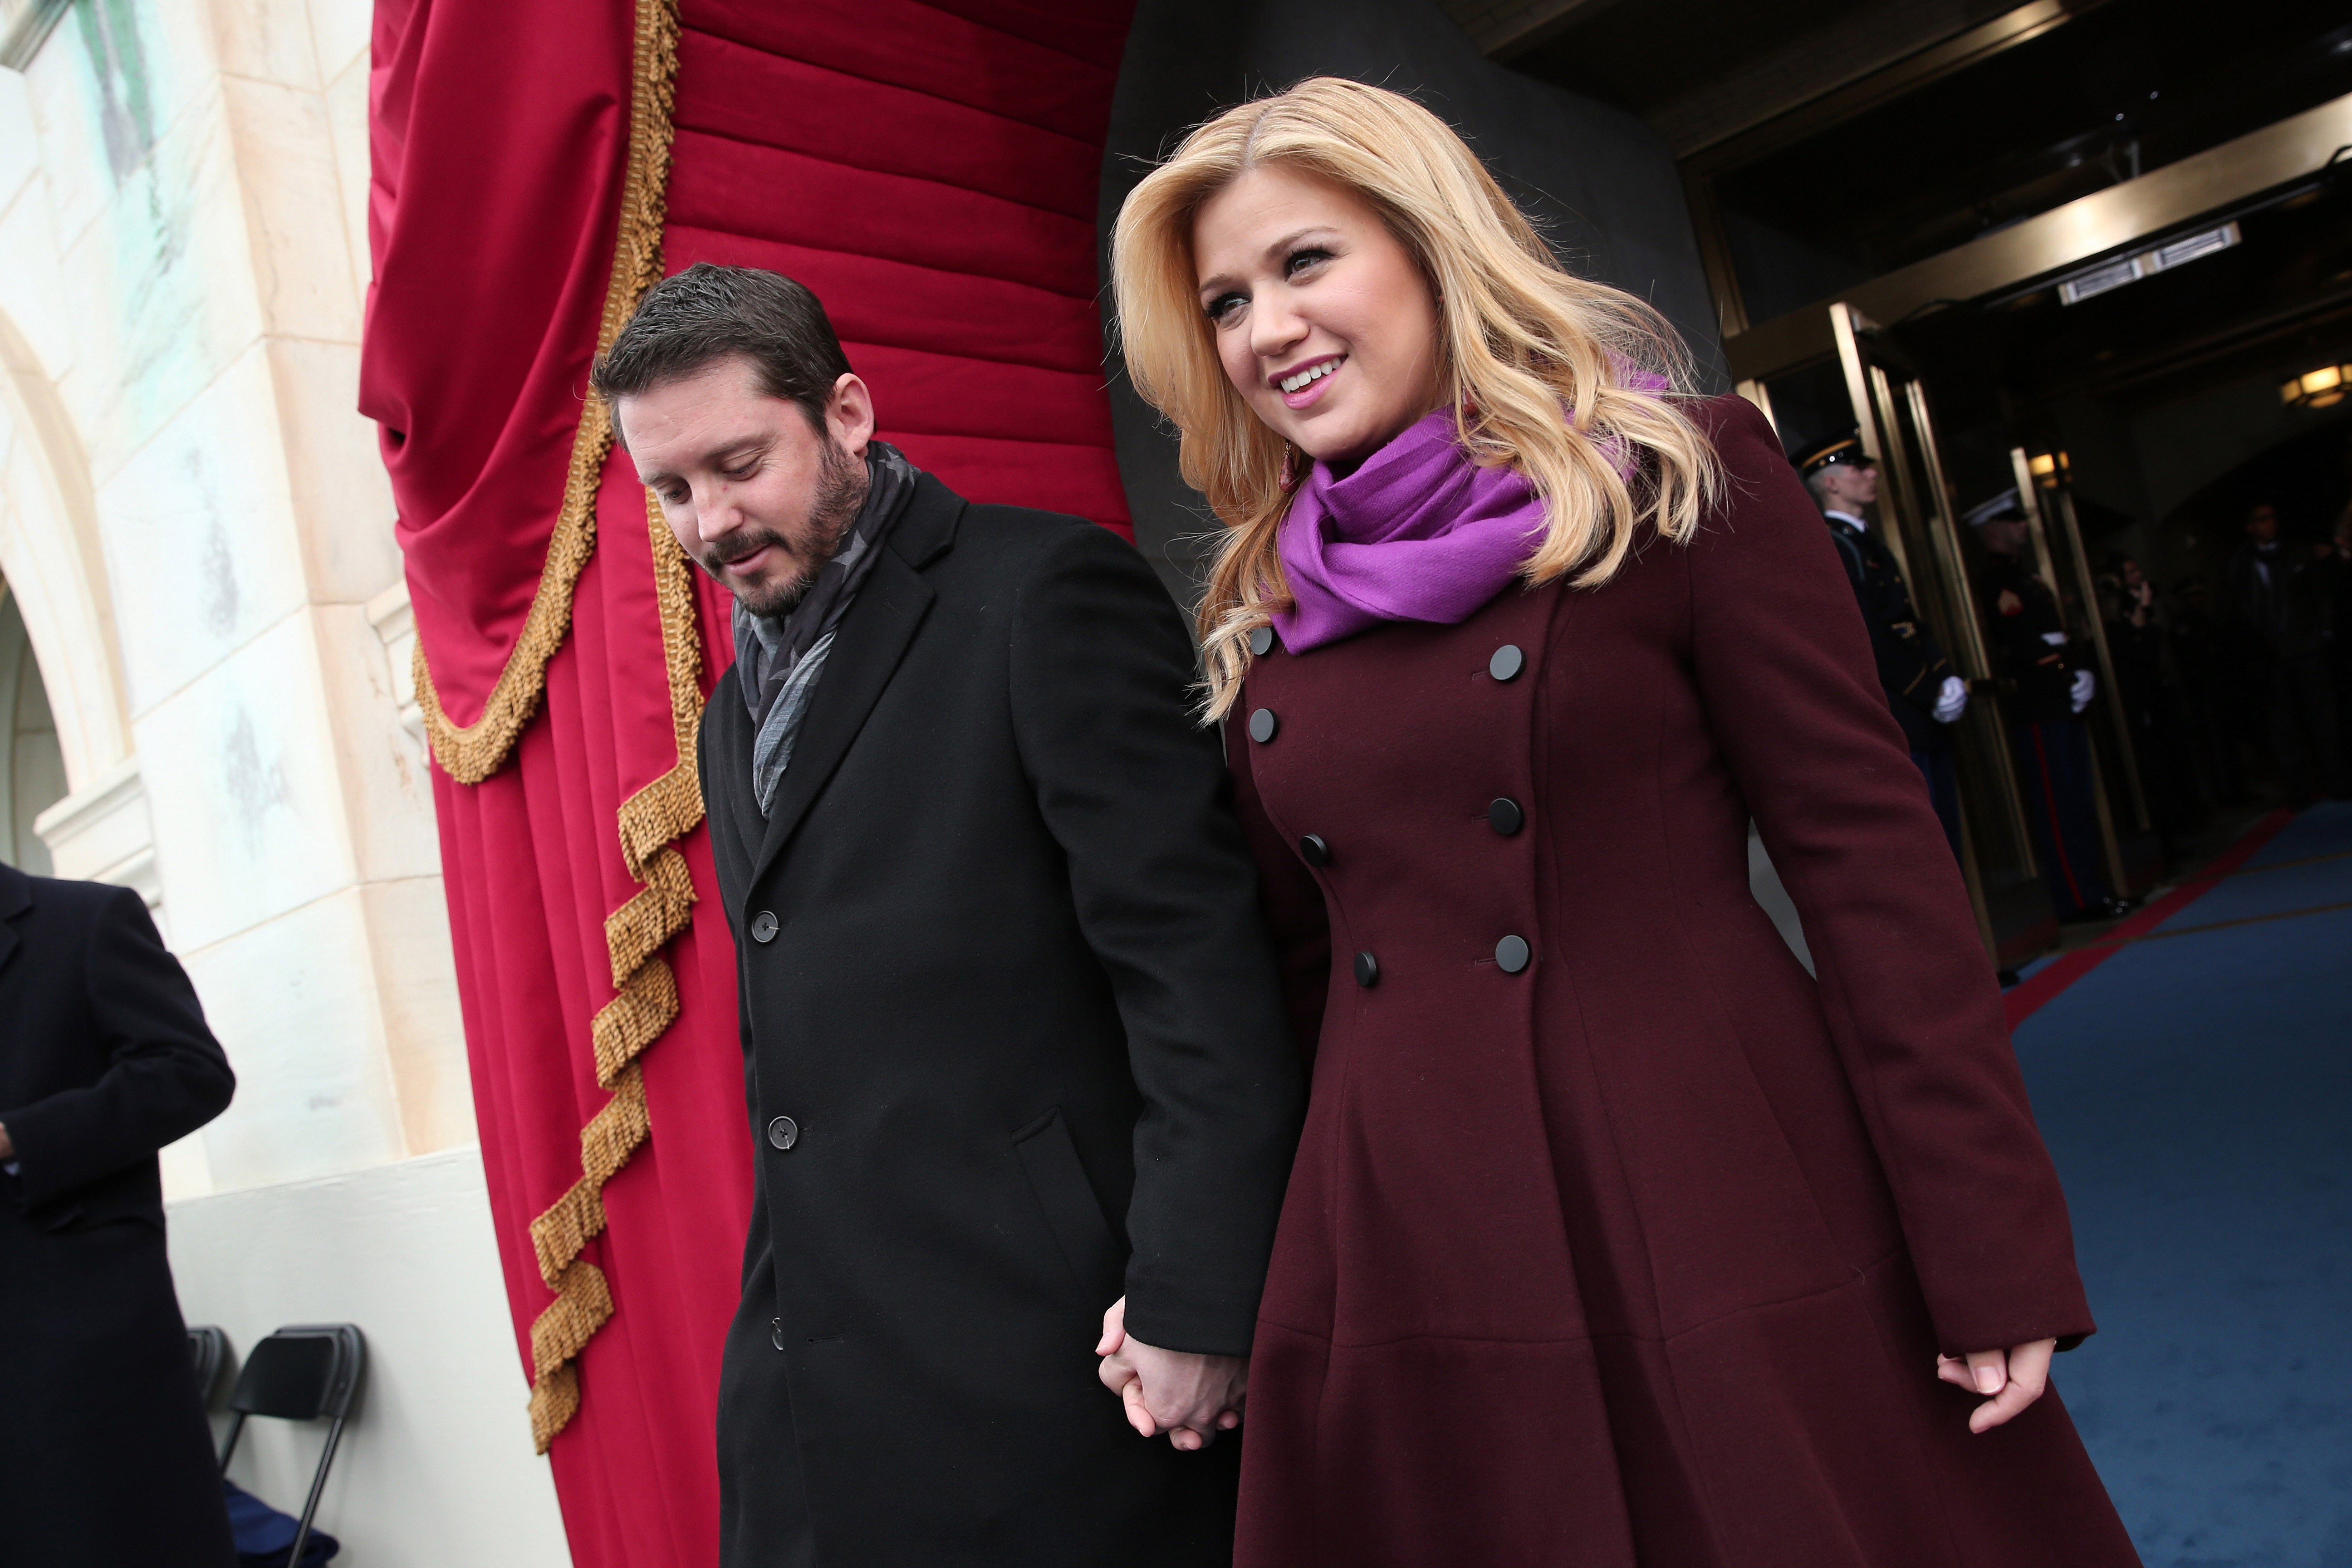 Brandon Blackstock and Kelly Clarkson at the Presidential Inauguration in Washington, 2013 | Source: Getty Images